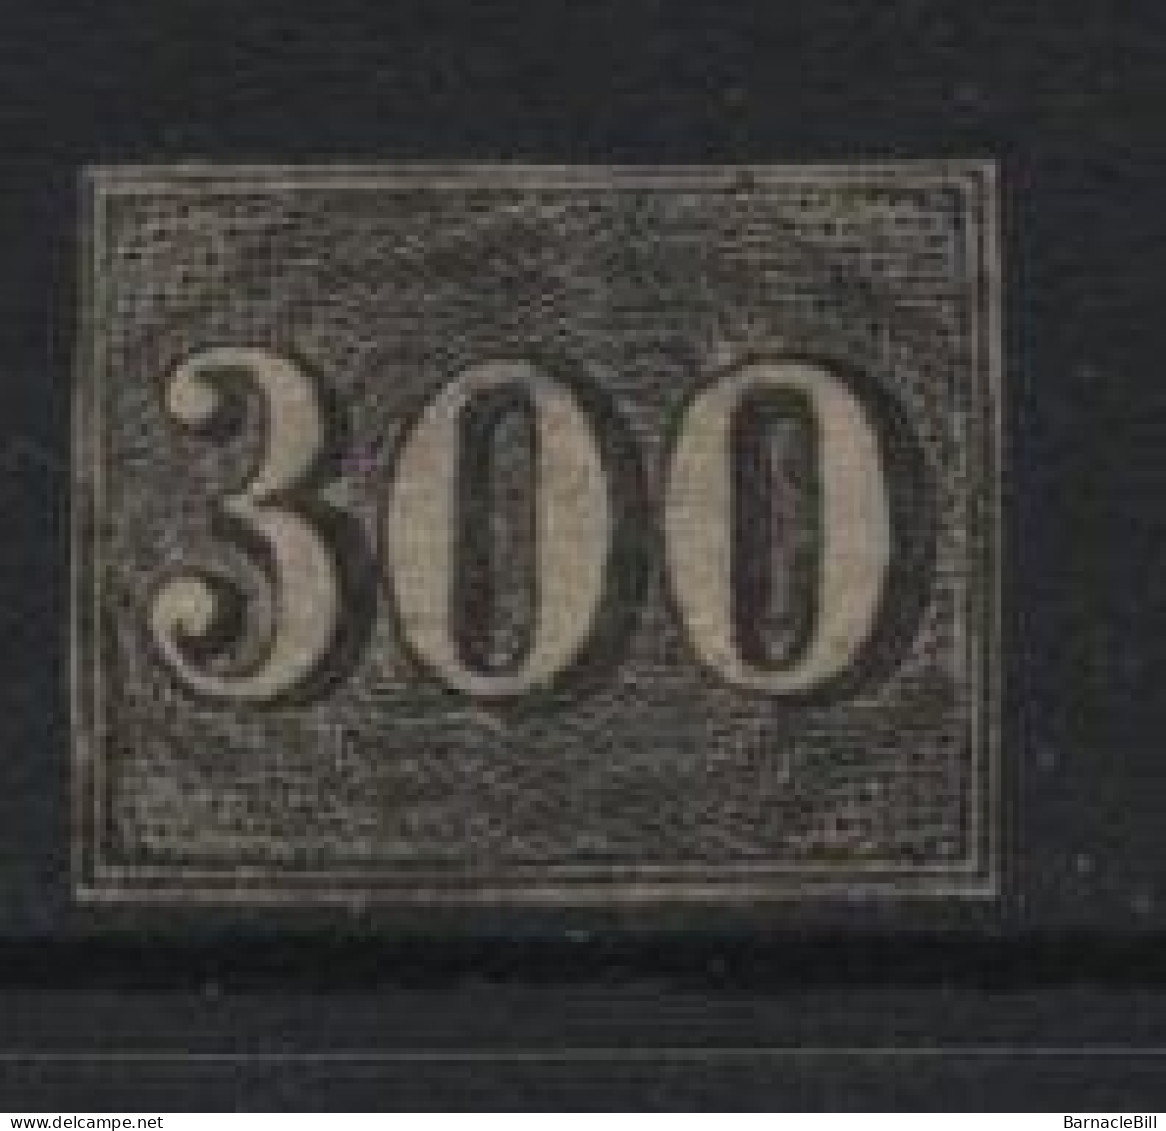 Brazil (12) 1850 Issue. 300r. Black. Used. Hinged. - Used Stamps